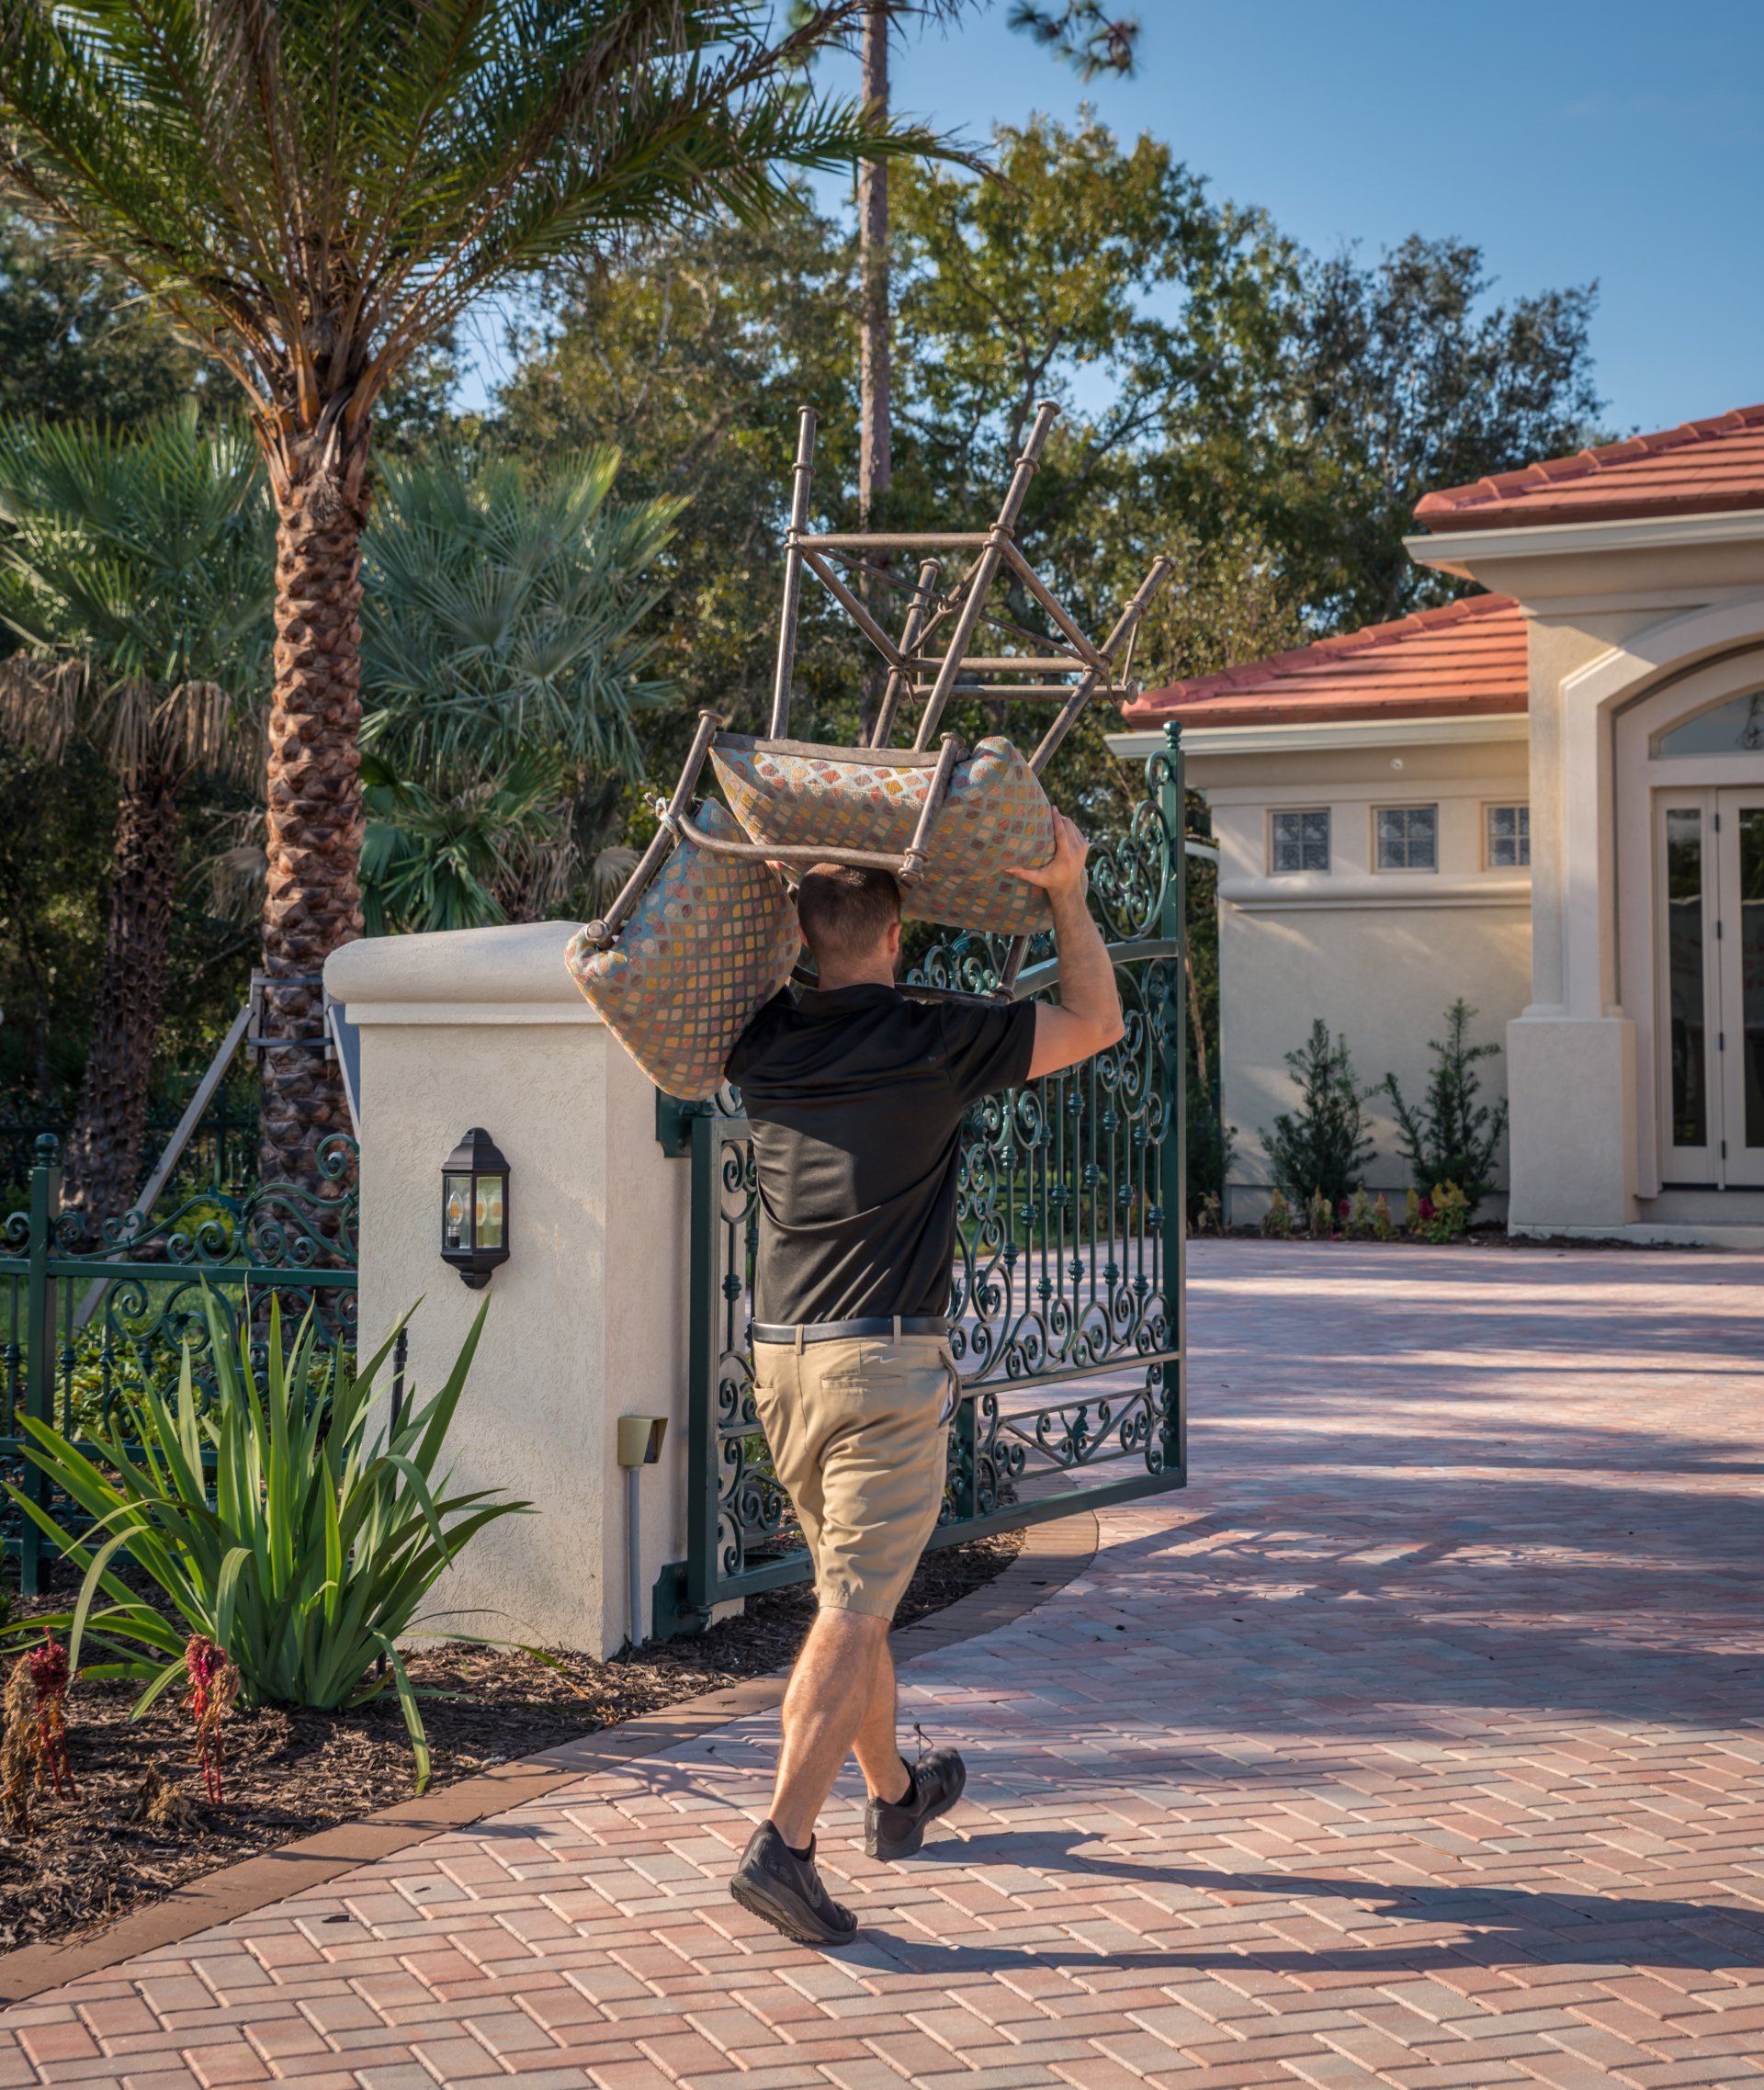 Long-Distance Movers Near You